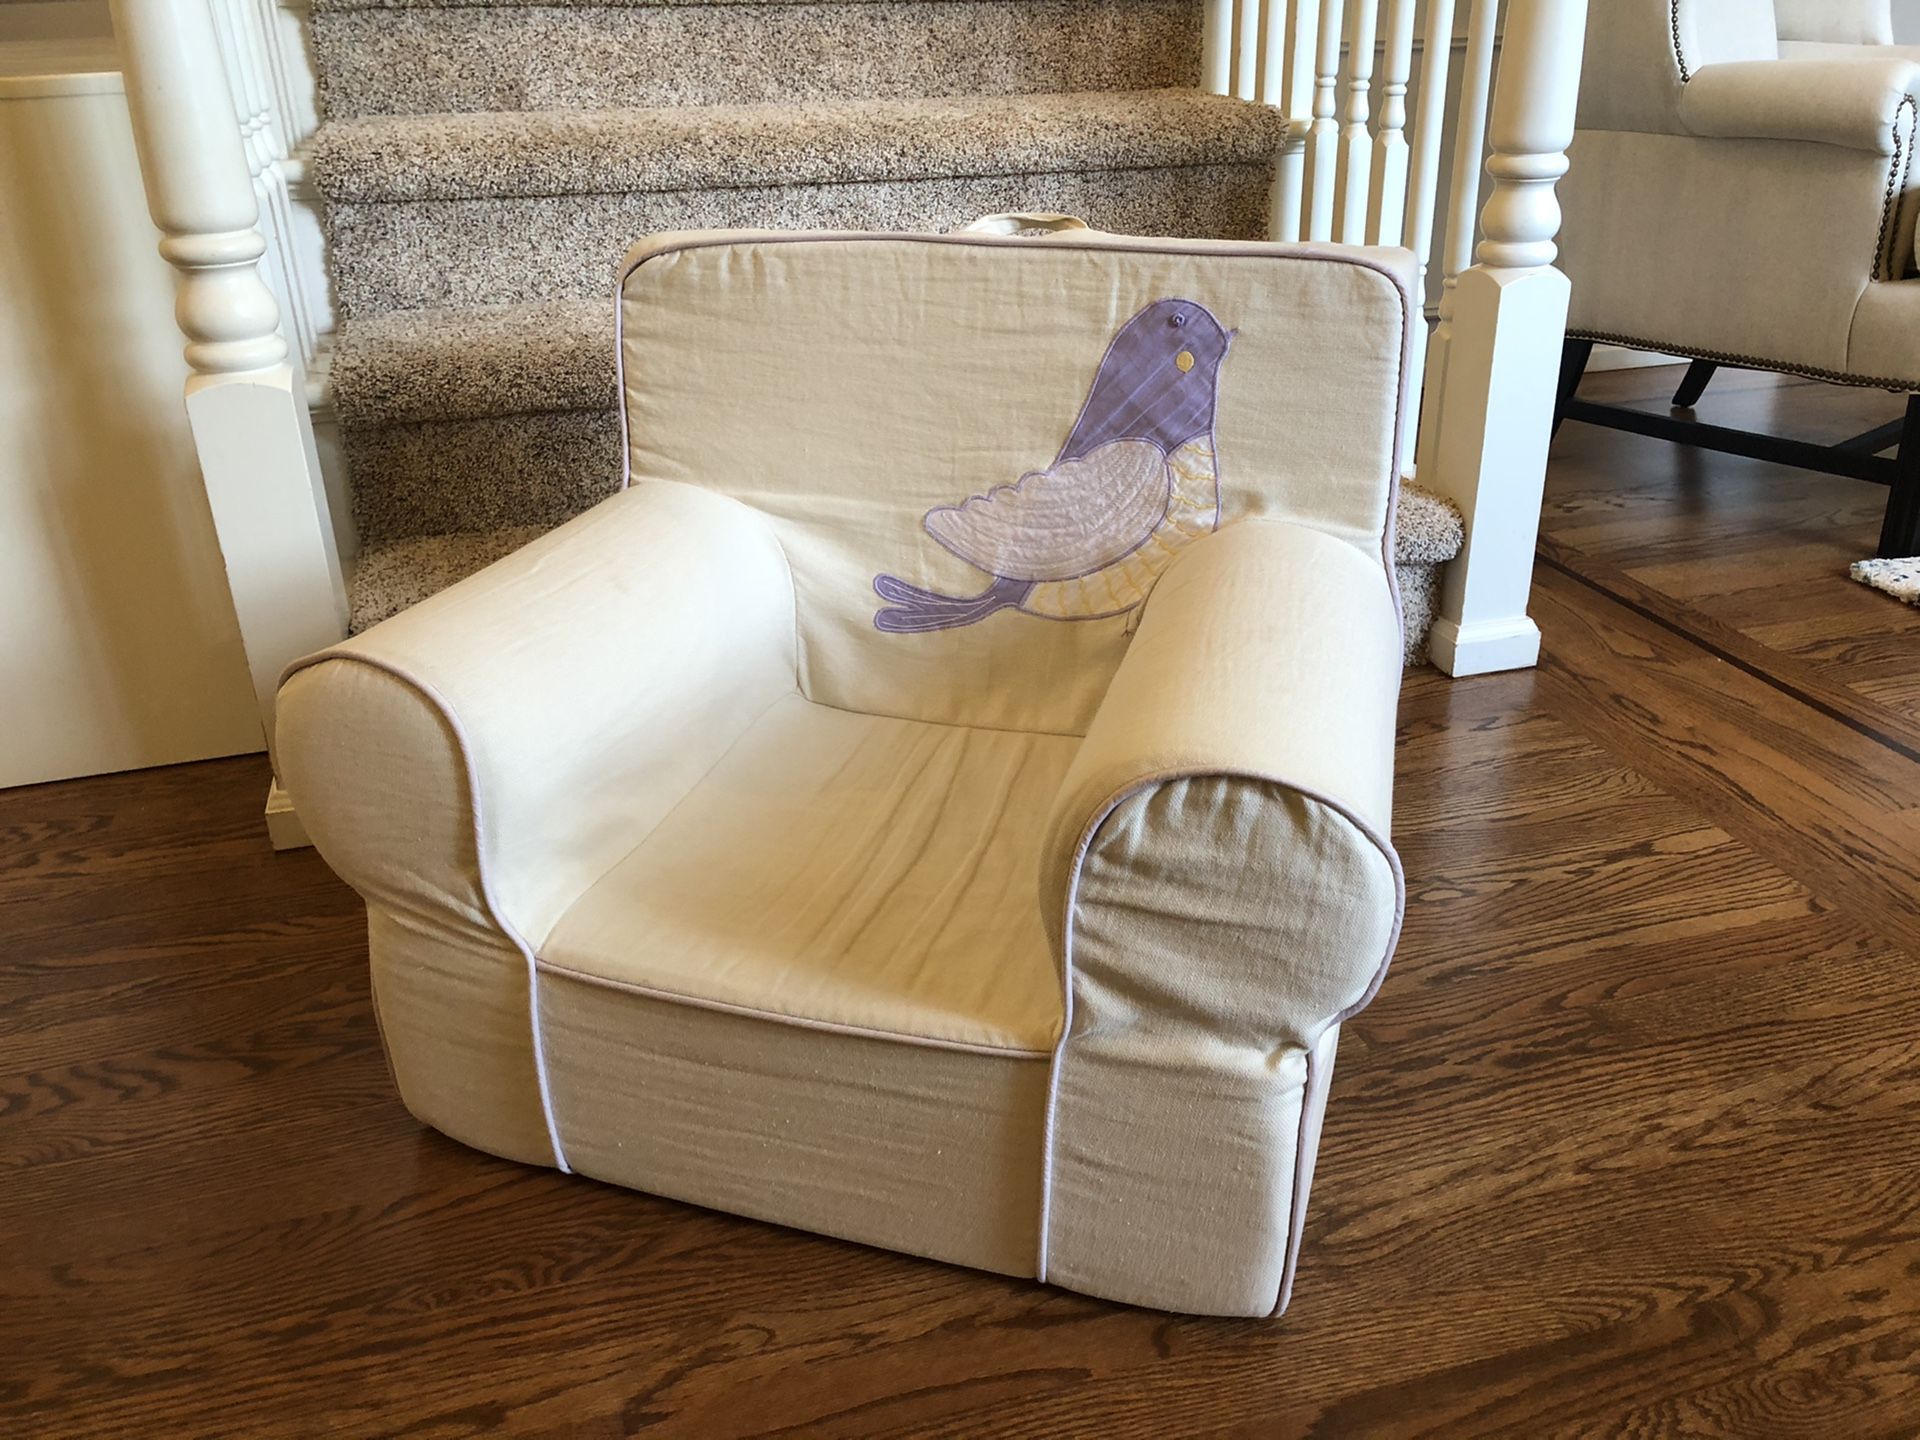 Pottery barn kids “Anywhere Chair” - Tan & Violet